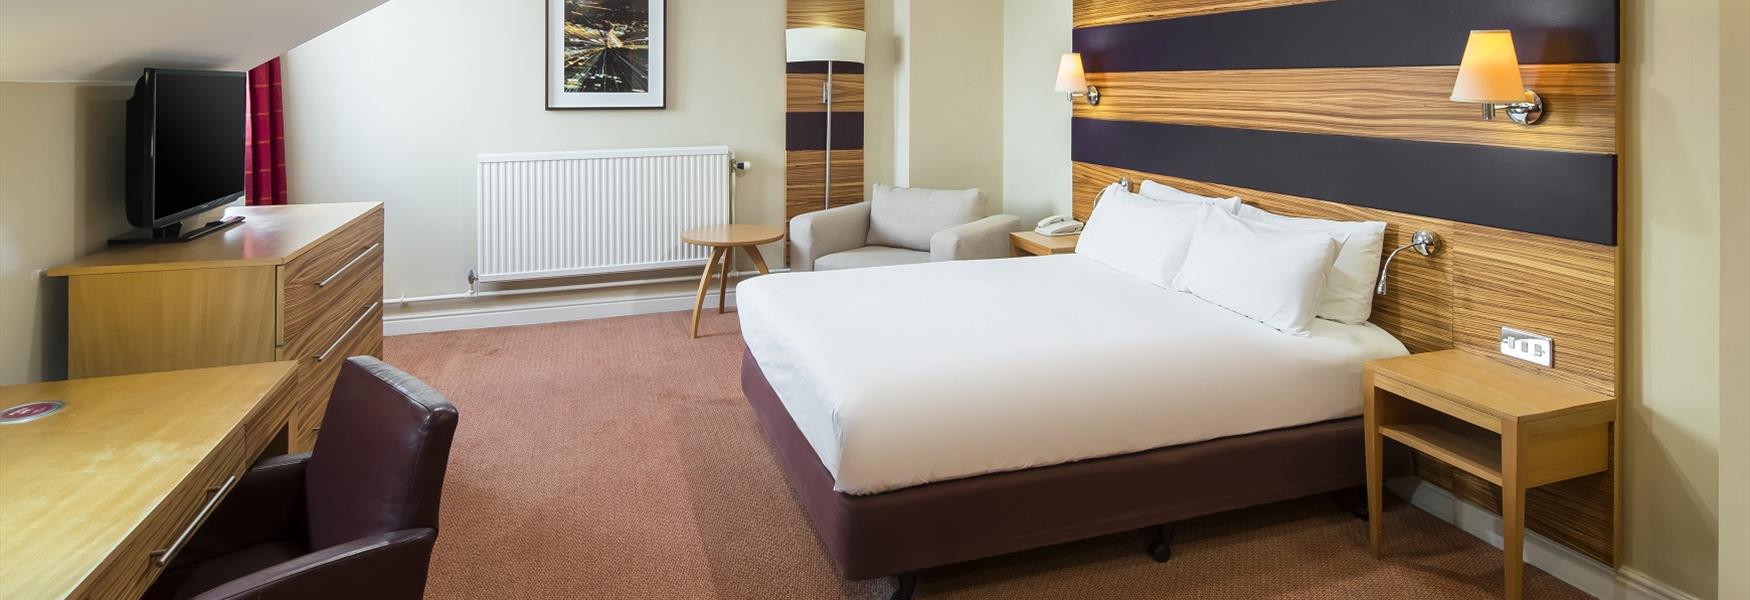 Premium Rooms at the Crowne Plaza Hotel, Chester